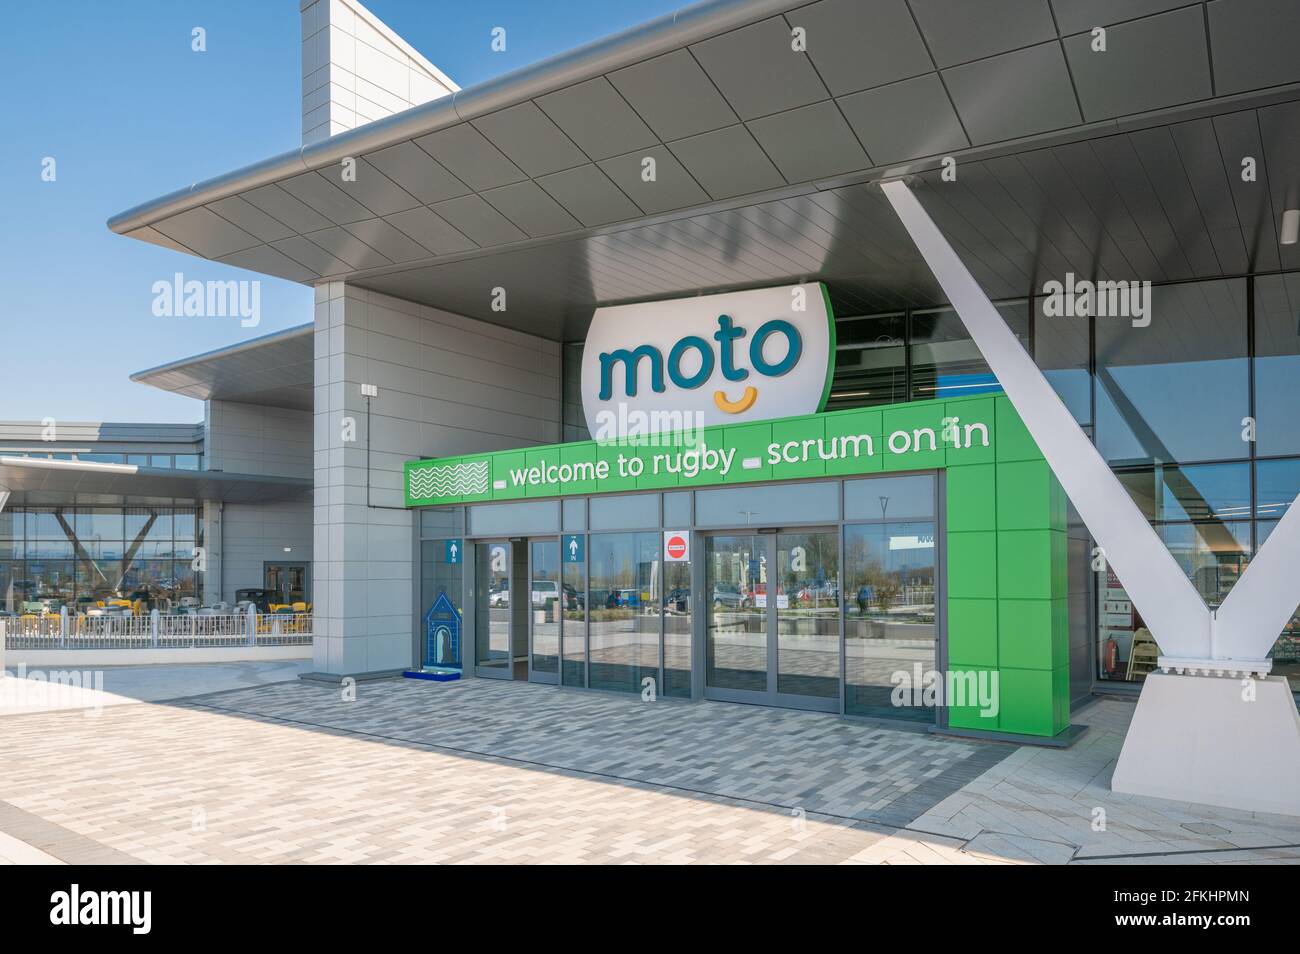 The Moto Services at Rugby, on the M6 motorway junction 1. The services opened in April 2021. Stock Photo